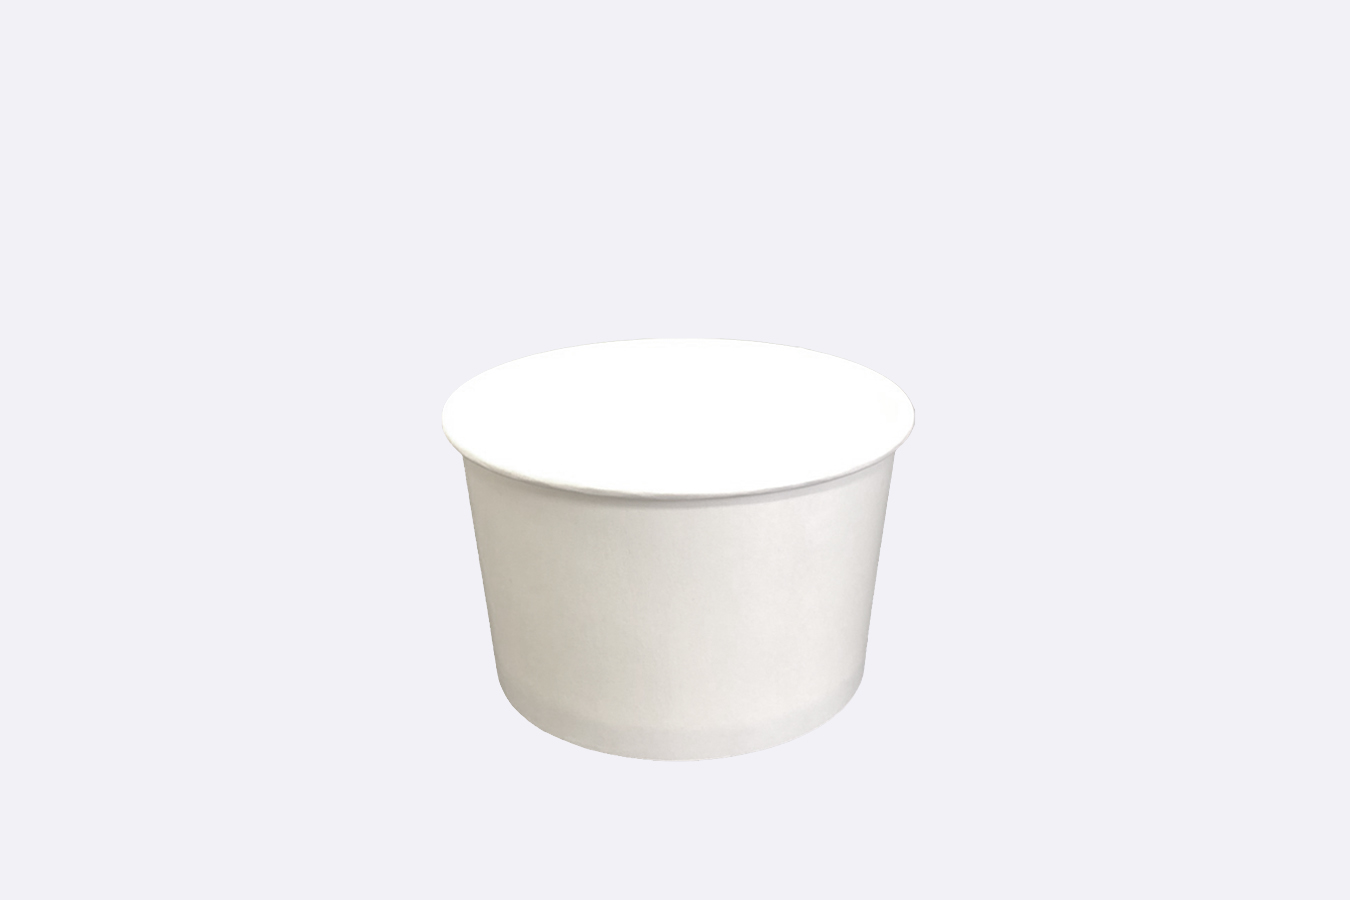 Premium takeout soup container white color 8 oz size Athena paper soup cup by Ecoapx Inc